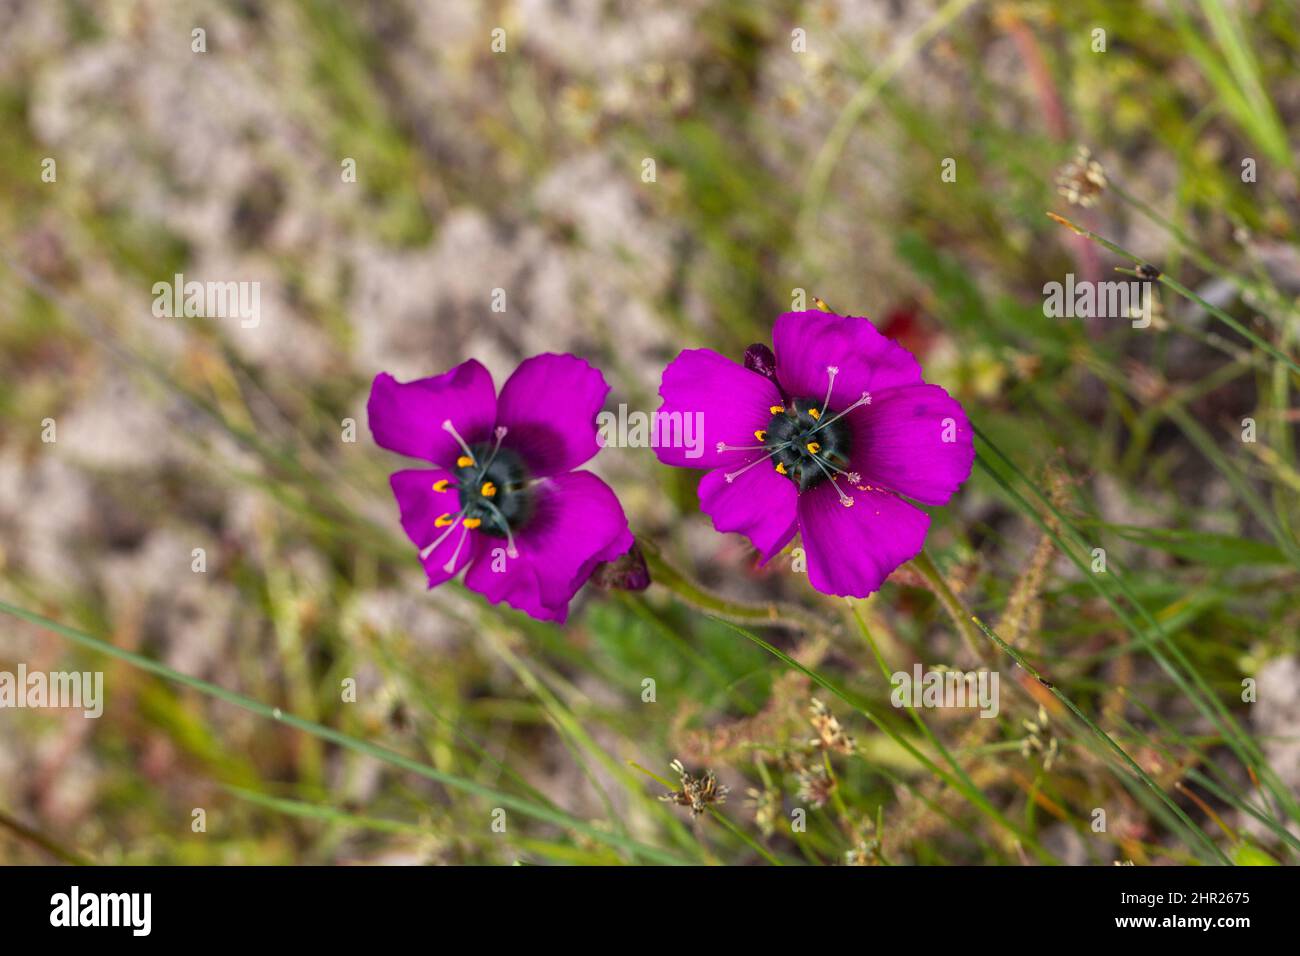 Two purple flowers of the carnivorous plant Drosera cistiflora taken in natural habitat close to Malmesbury in the Western Cape of South Africa Stock Photo